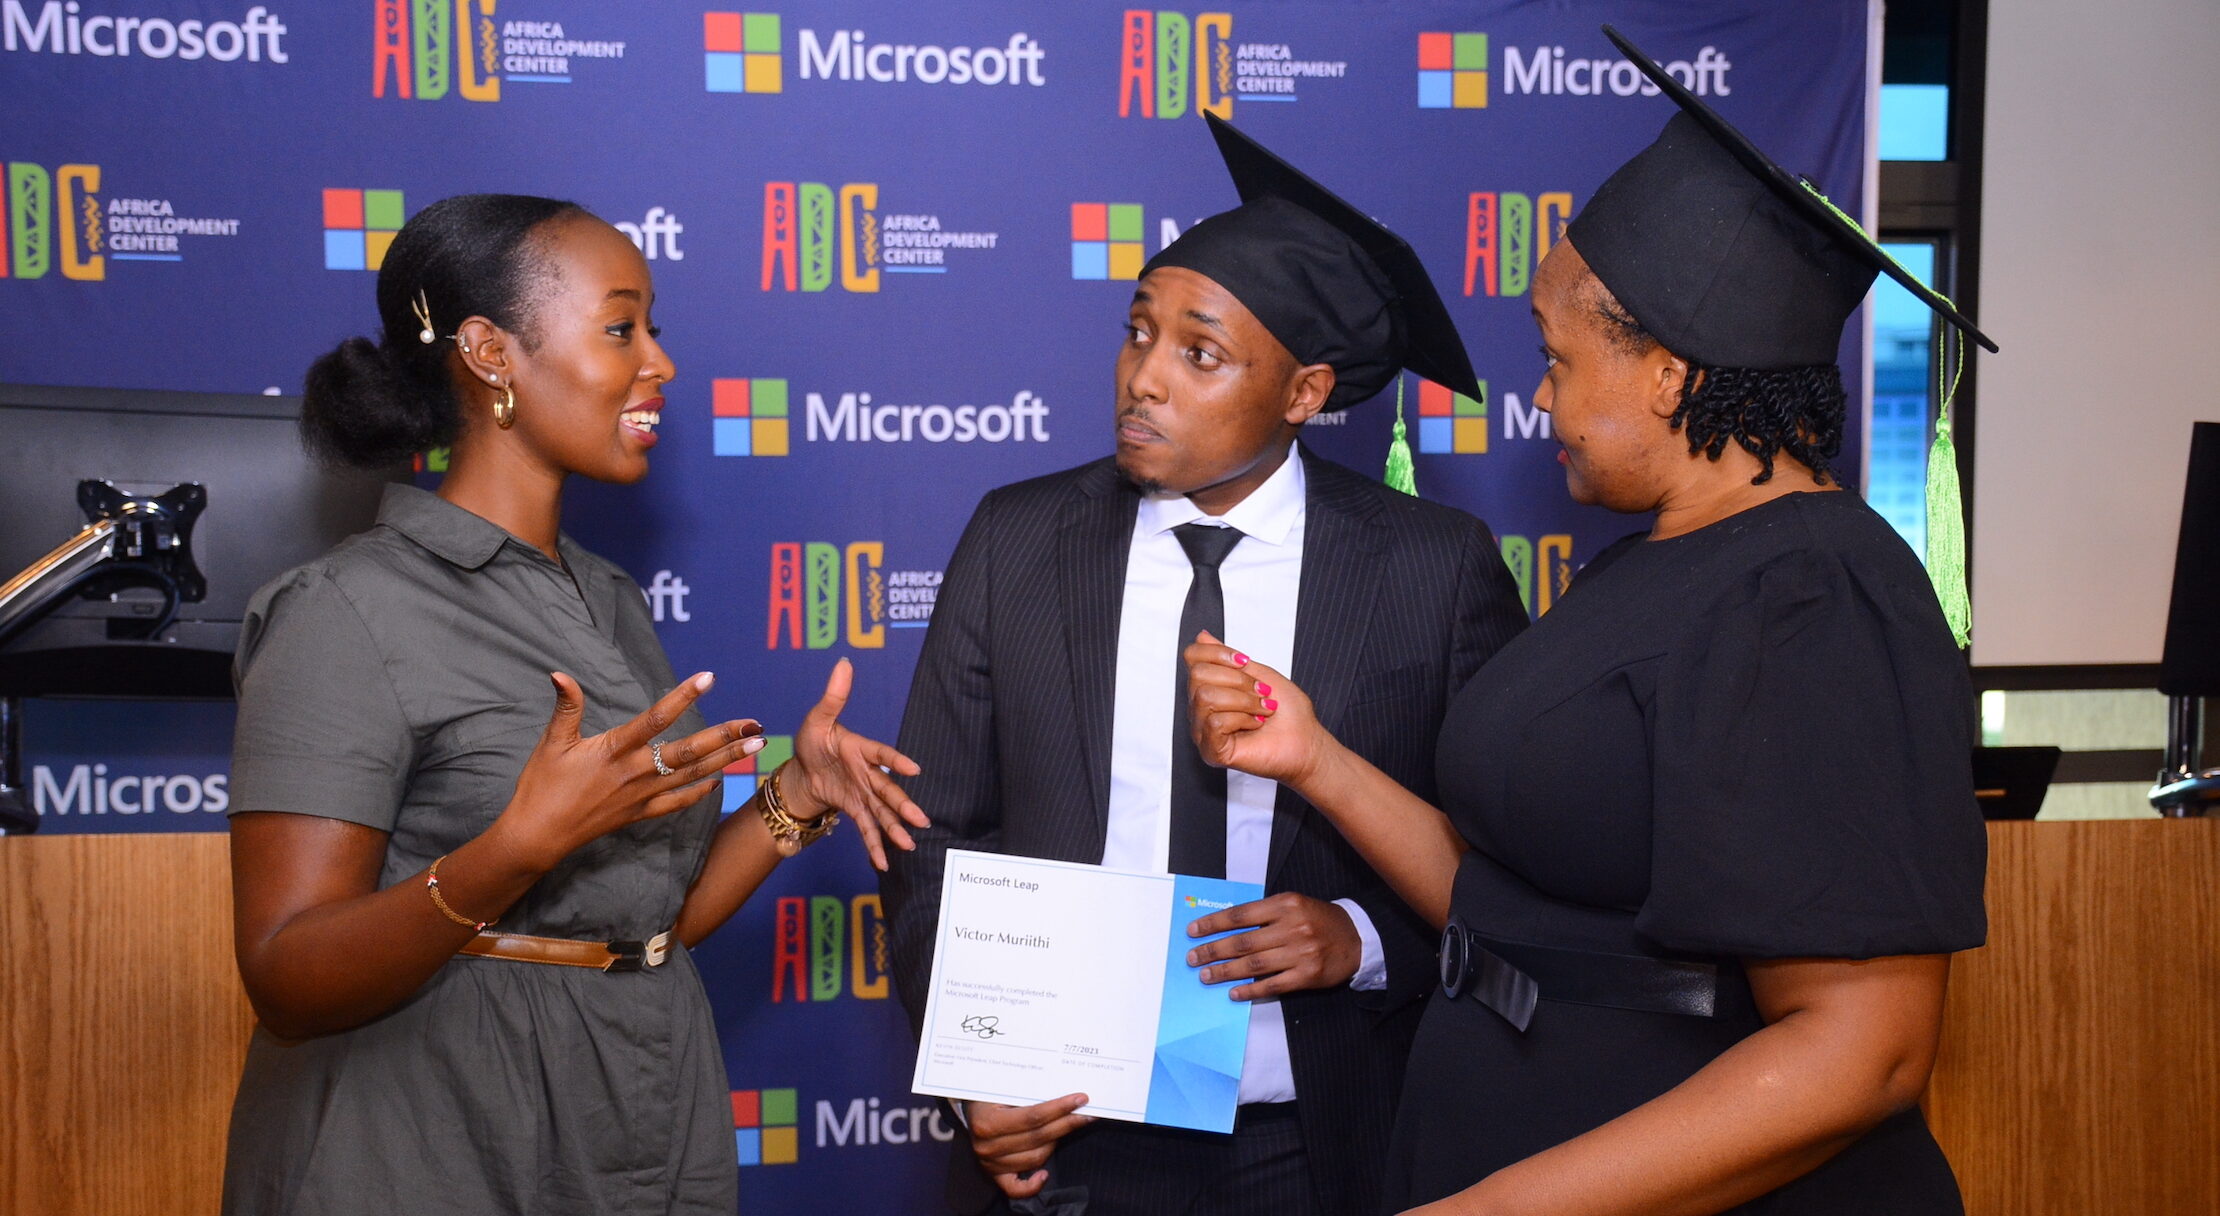 Microsoft ADC Launches Second Faculty Upskilling Cohort to Advance Tech Education in Africa